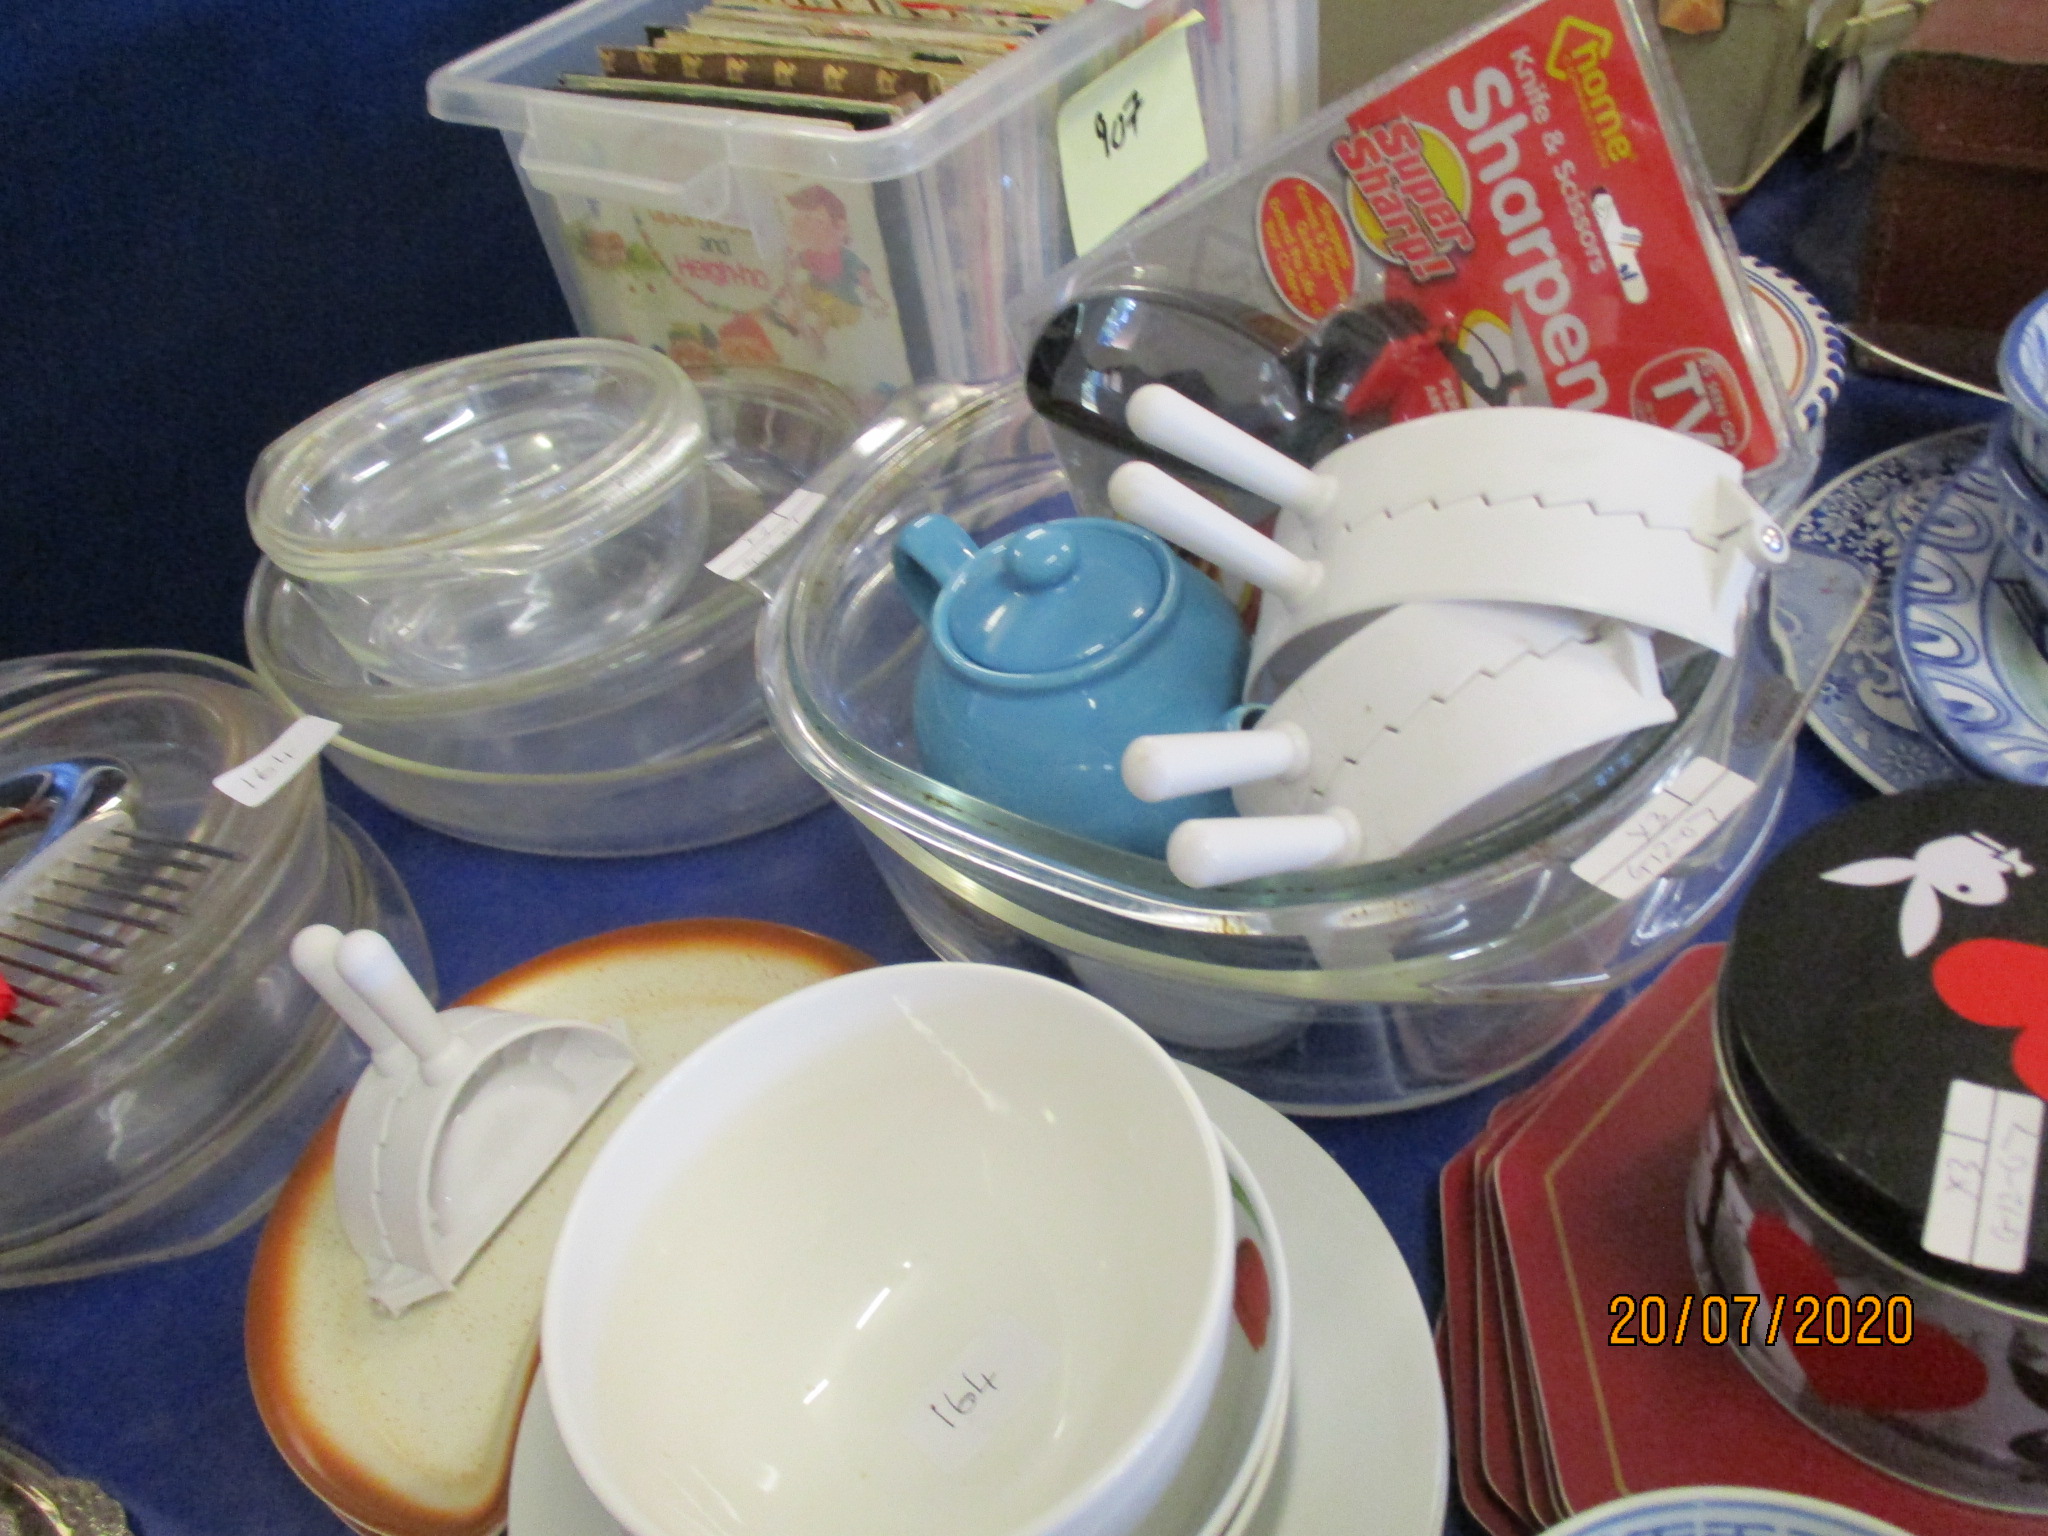 VARIOUS PYREX AND KITCHEN WARE, POTTERY ETC - Image 2 of 2